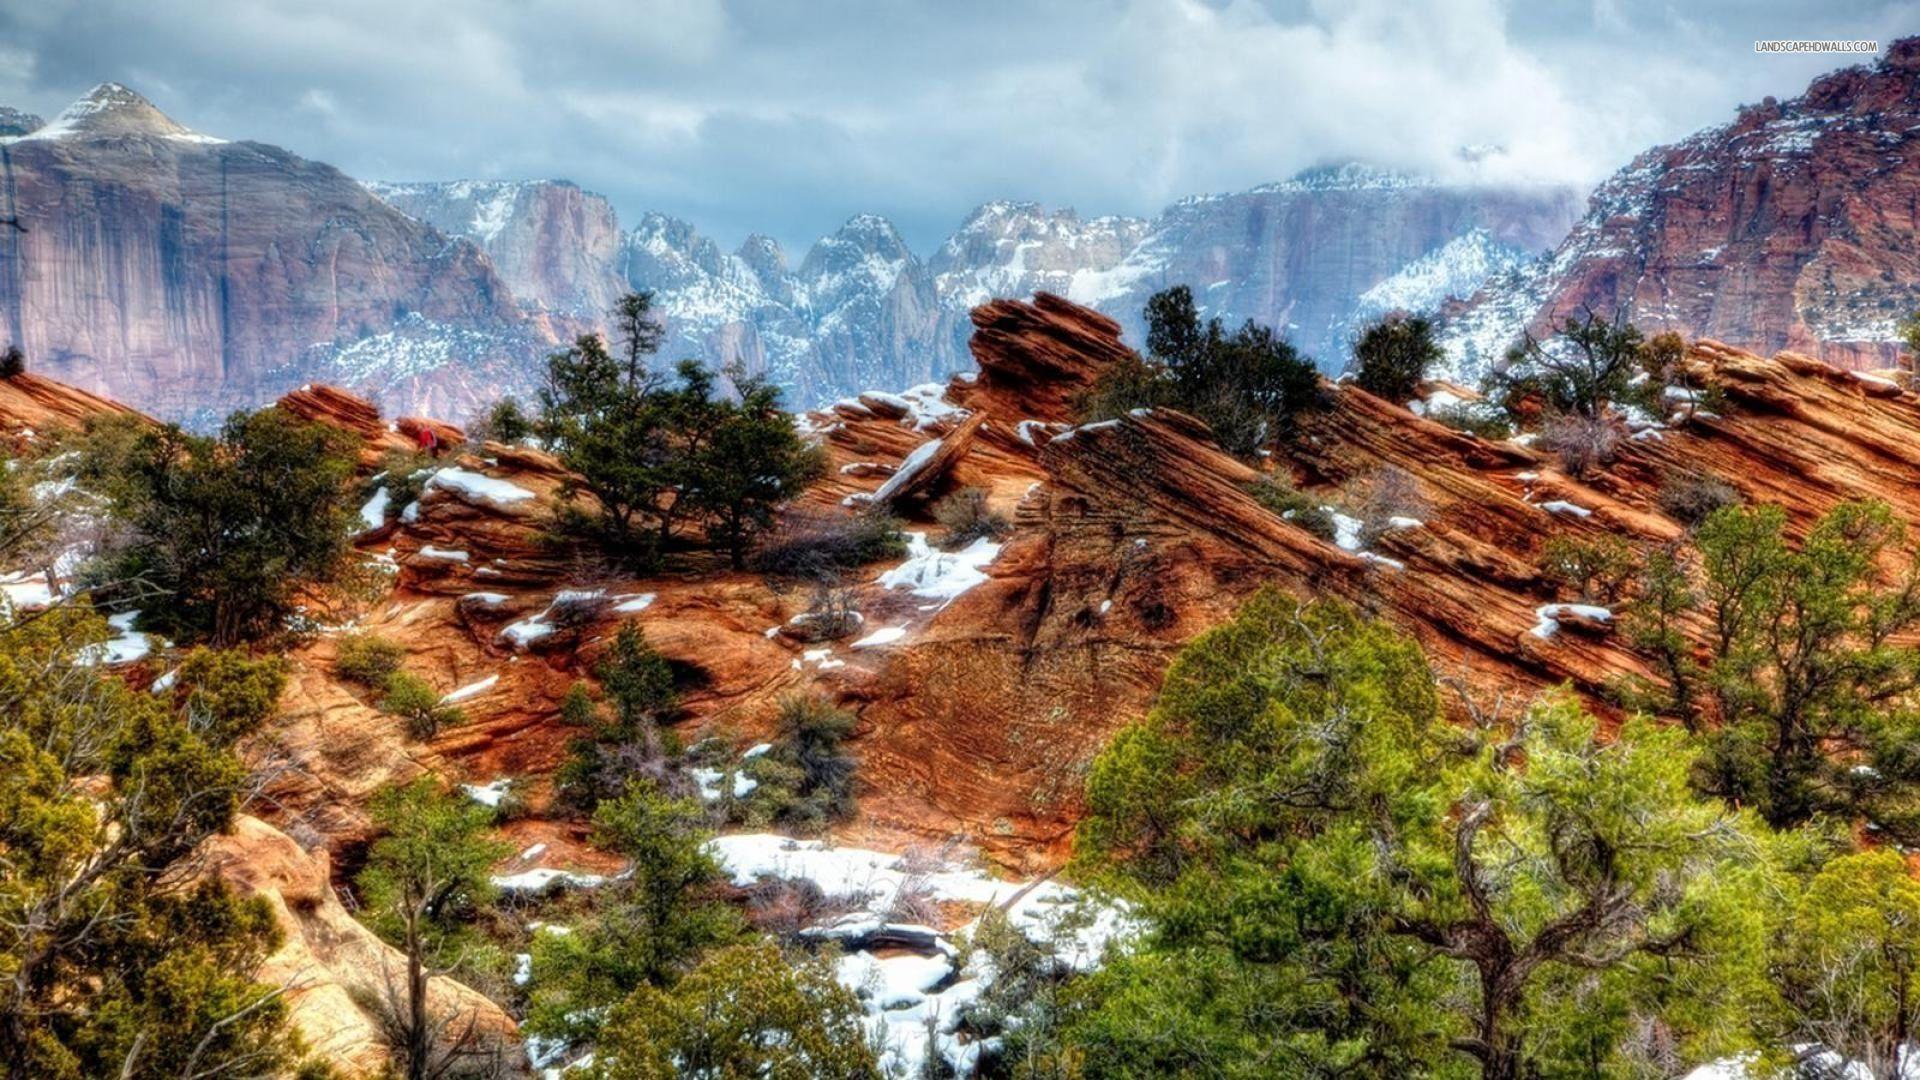 Zion National Park In The Winter